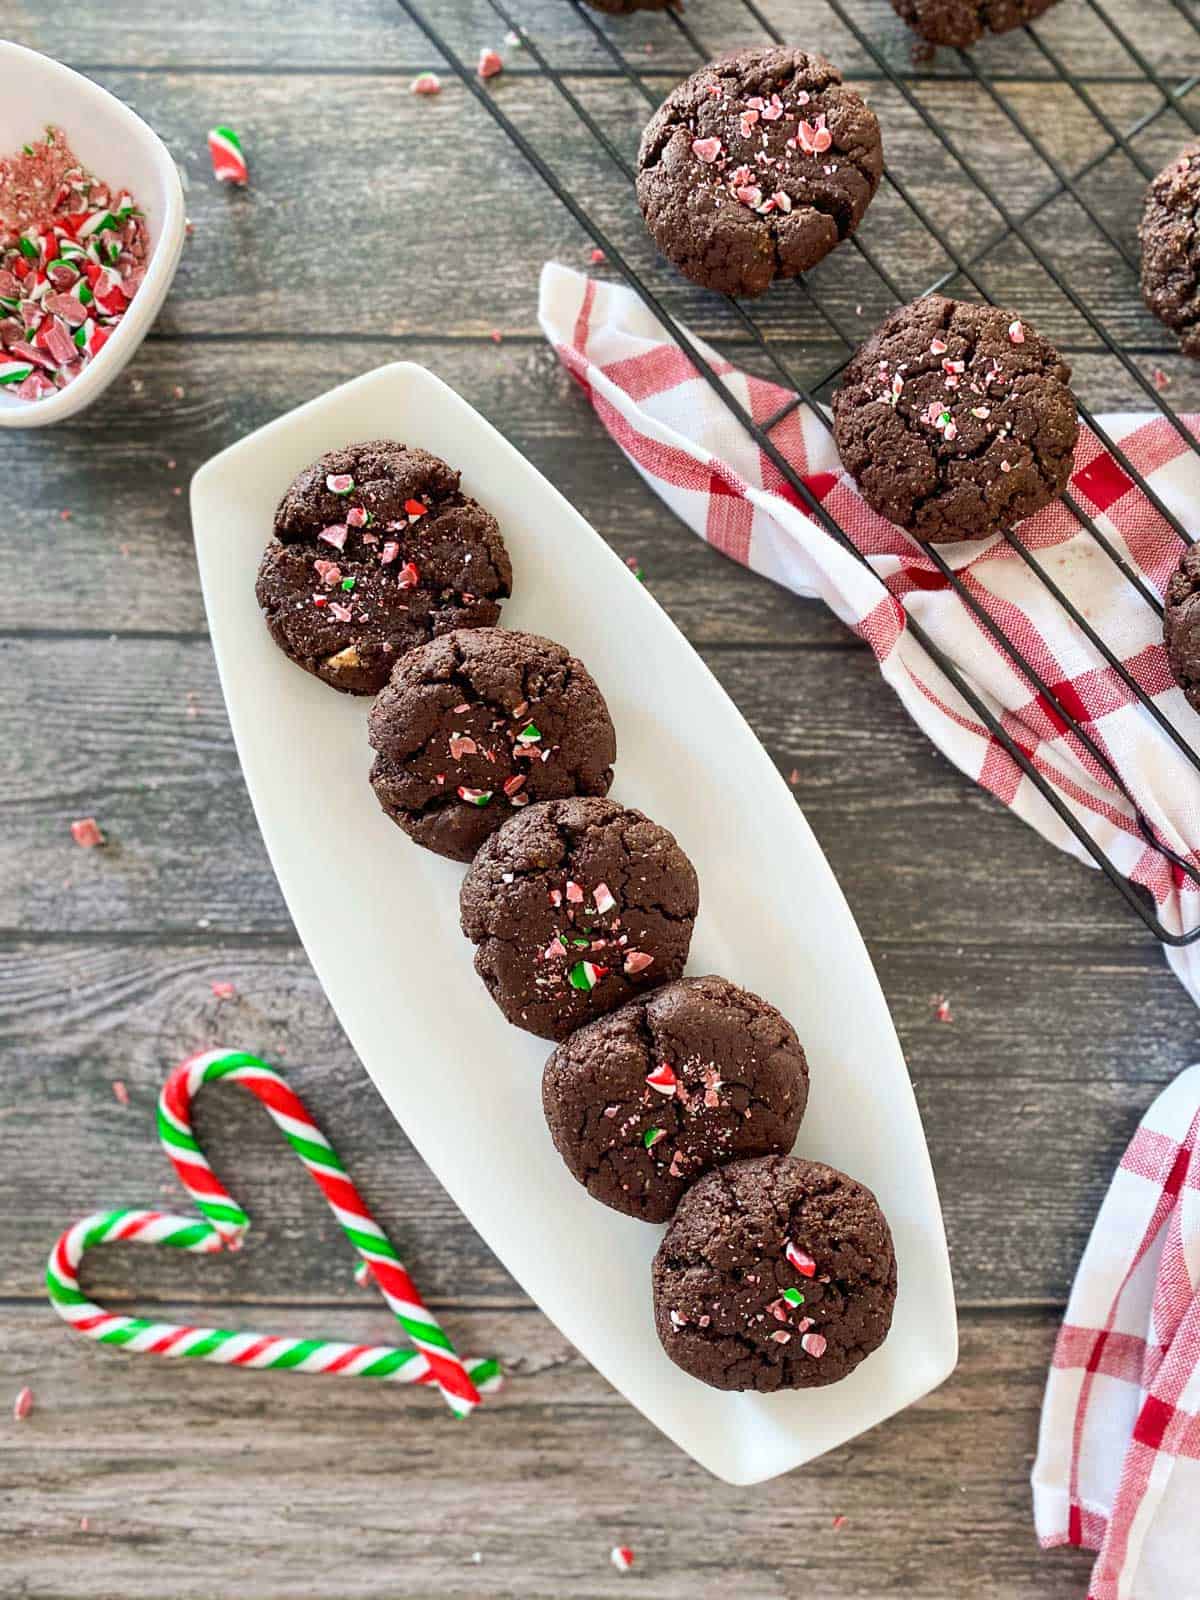 Chocolate cookies with candy cane pieces on top in a white serving dish.